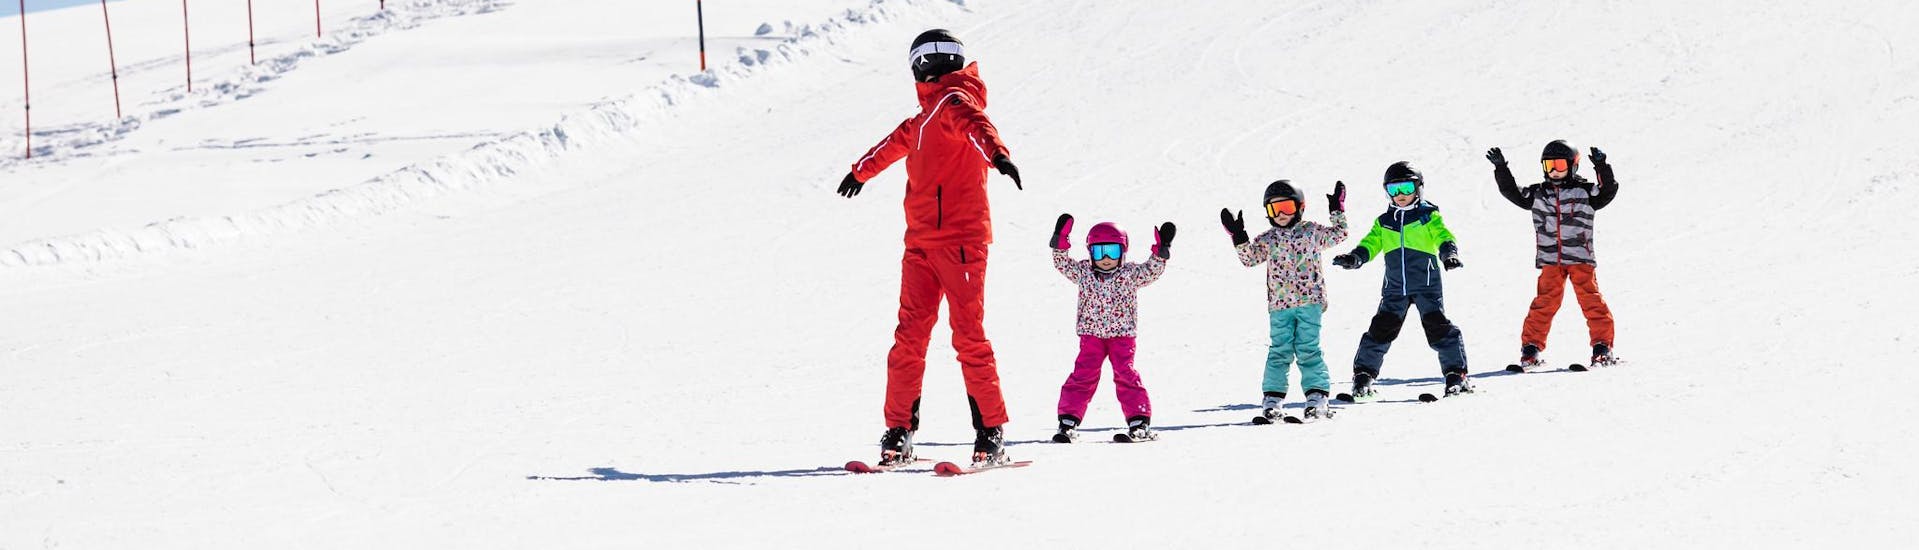 Ski instructor and kids skiing down the slopes during a ski lesson.